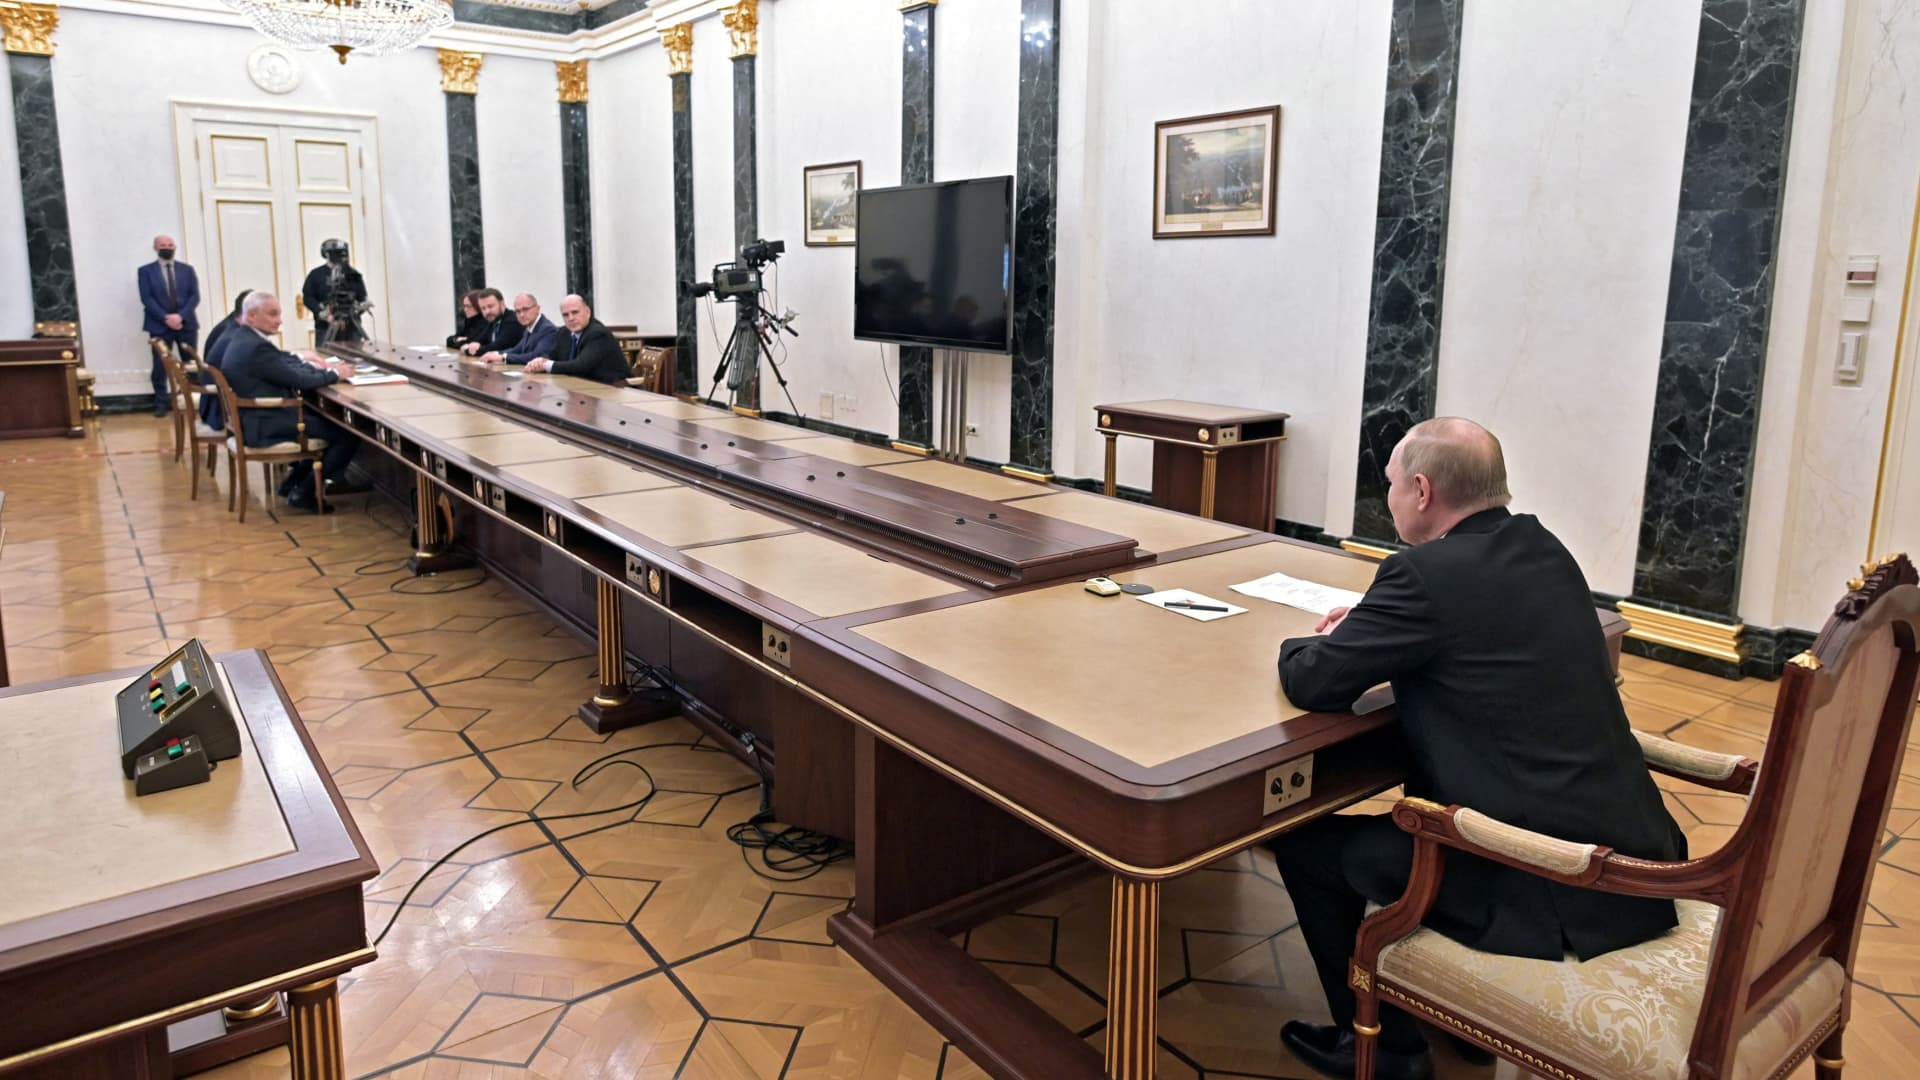 Russian President Vladimir Putin chairs a meeting on economic issues, in Moscow, Russia February 28, 2022.